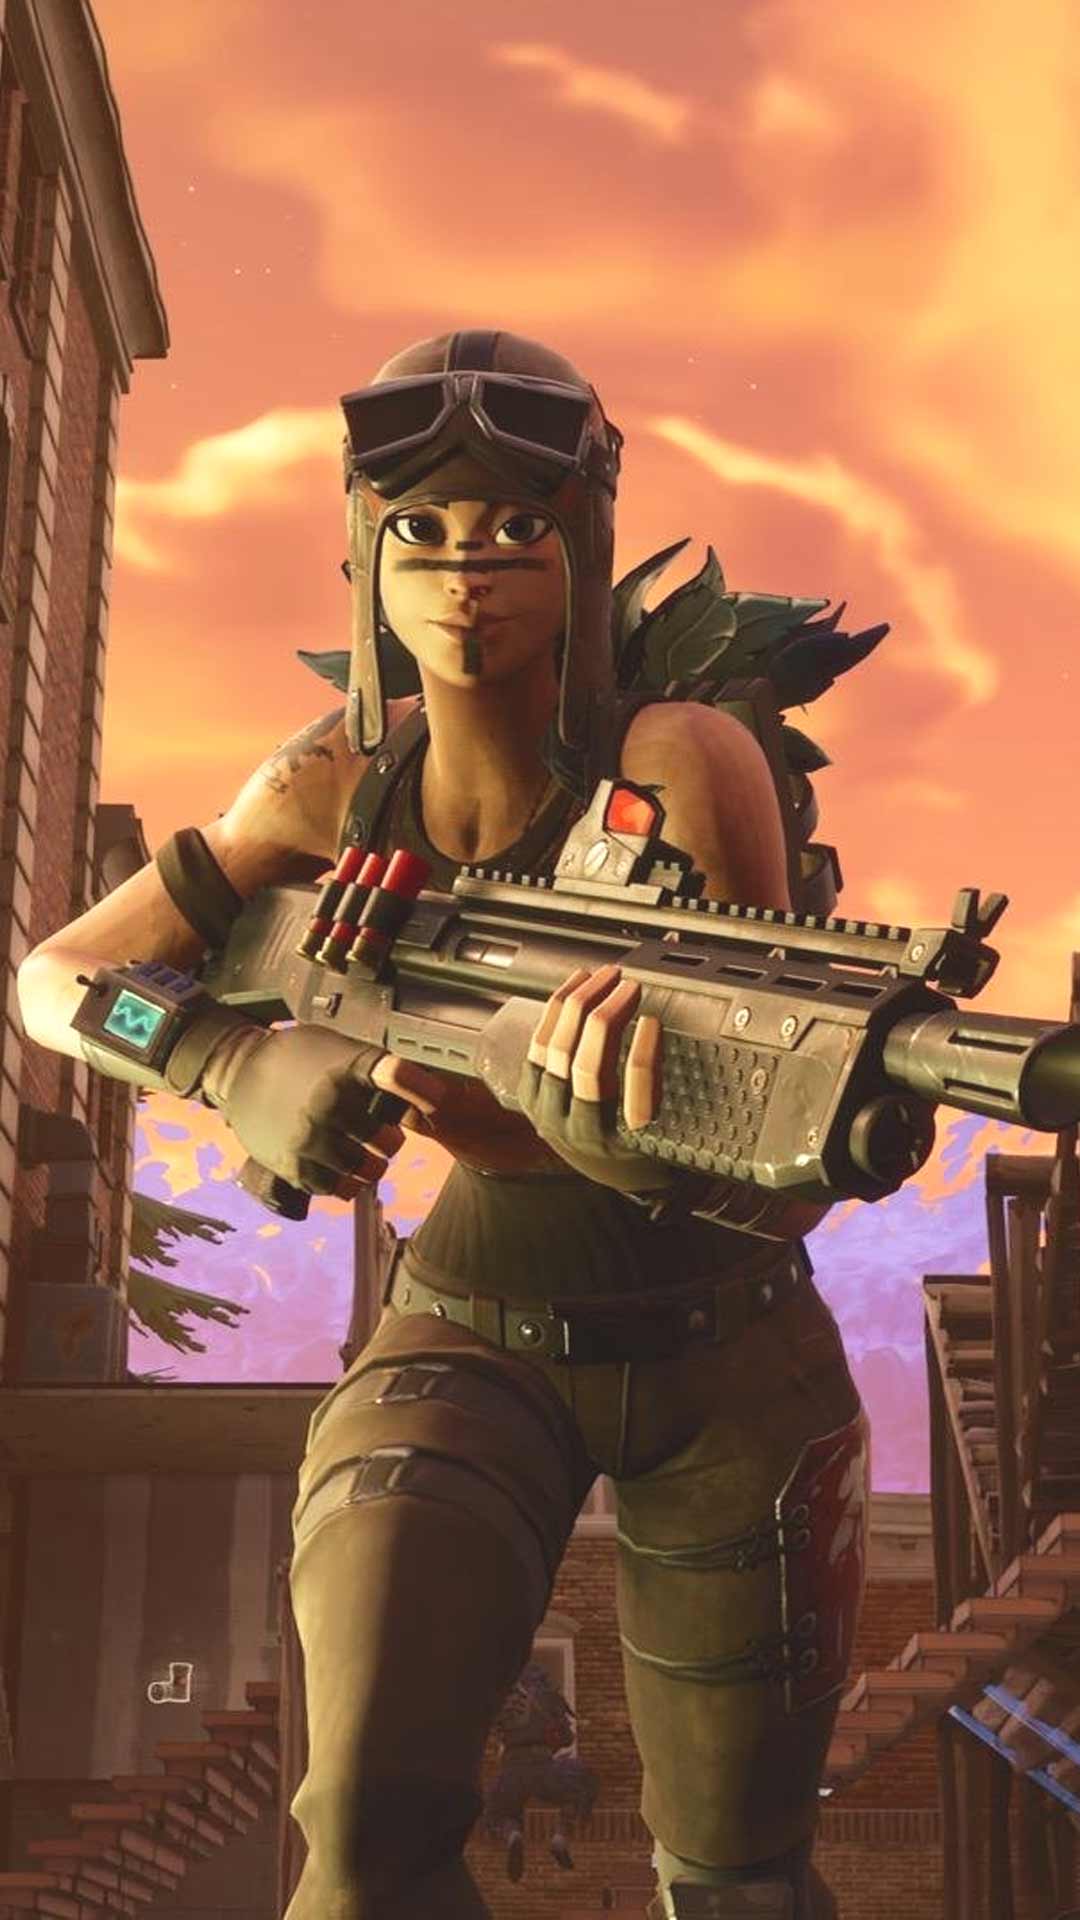 Renegade raider fortnite wallpapers phone backgrounds free download.